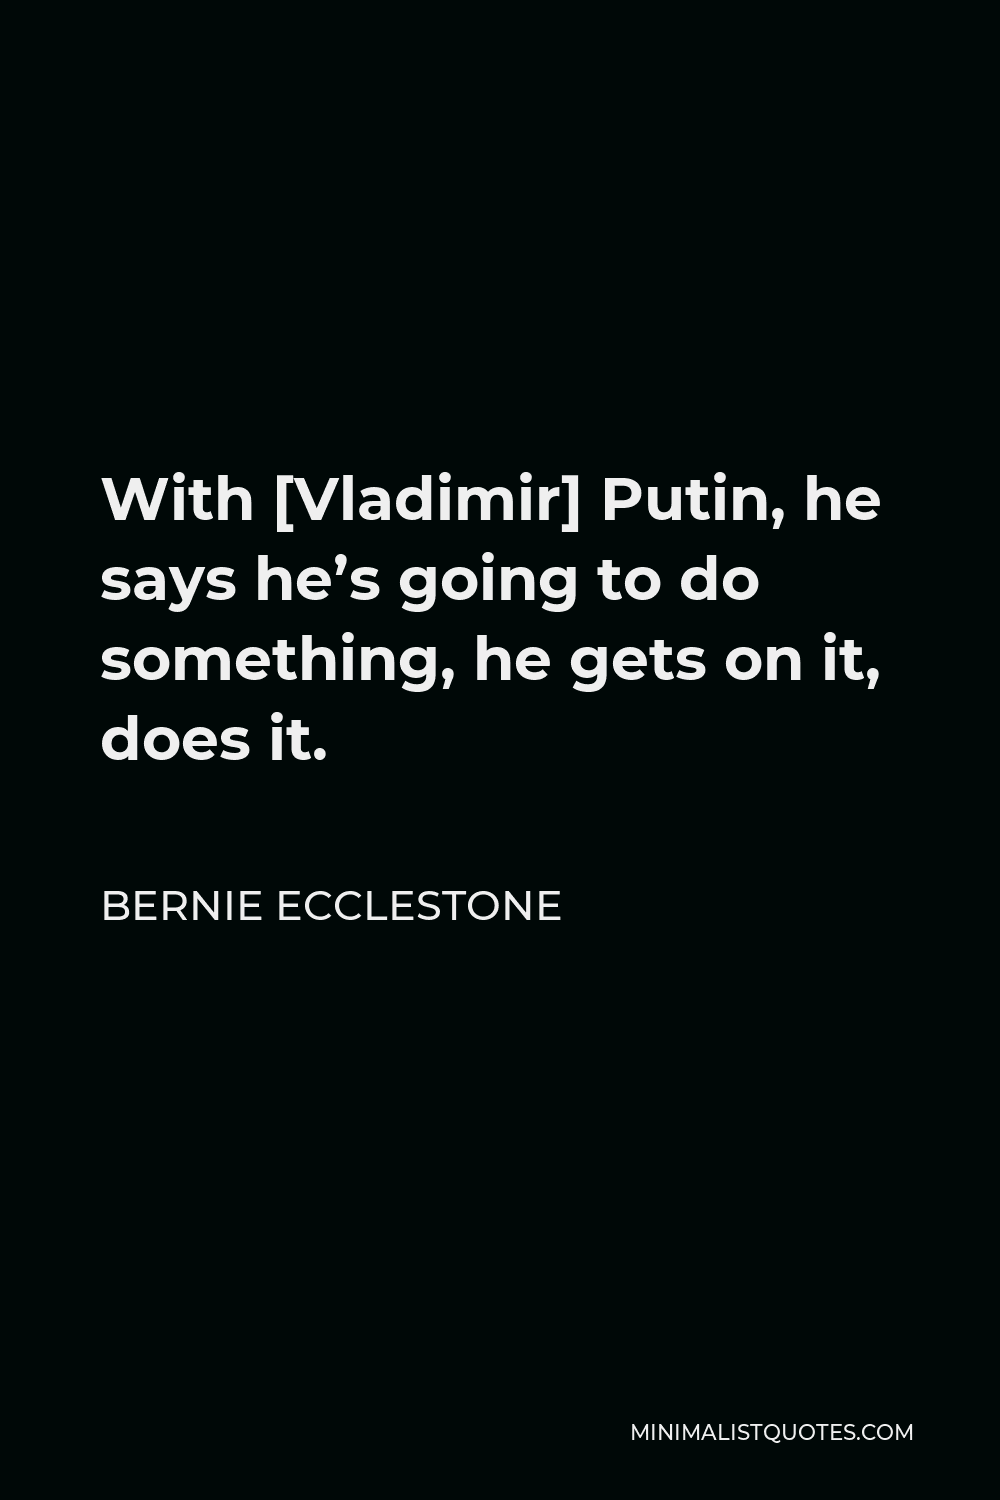 Bernie Ecclestone Quote - With [Vladimir] Putin, he says he’s going to do something, he gets on it, does it.